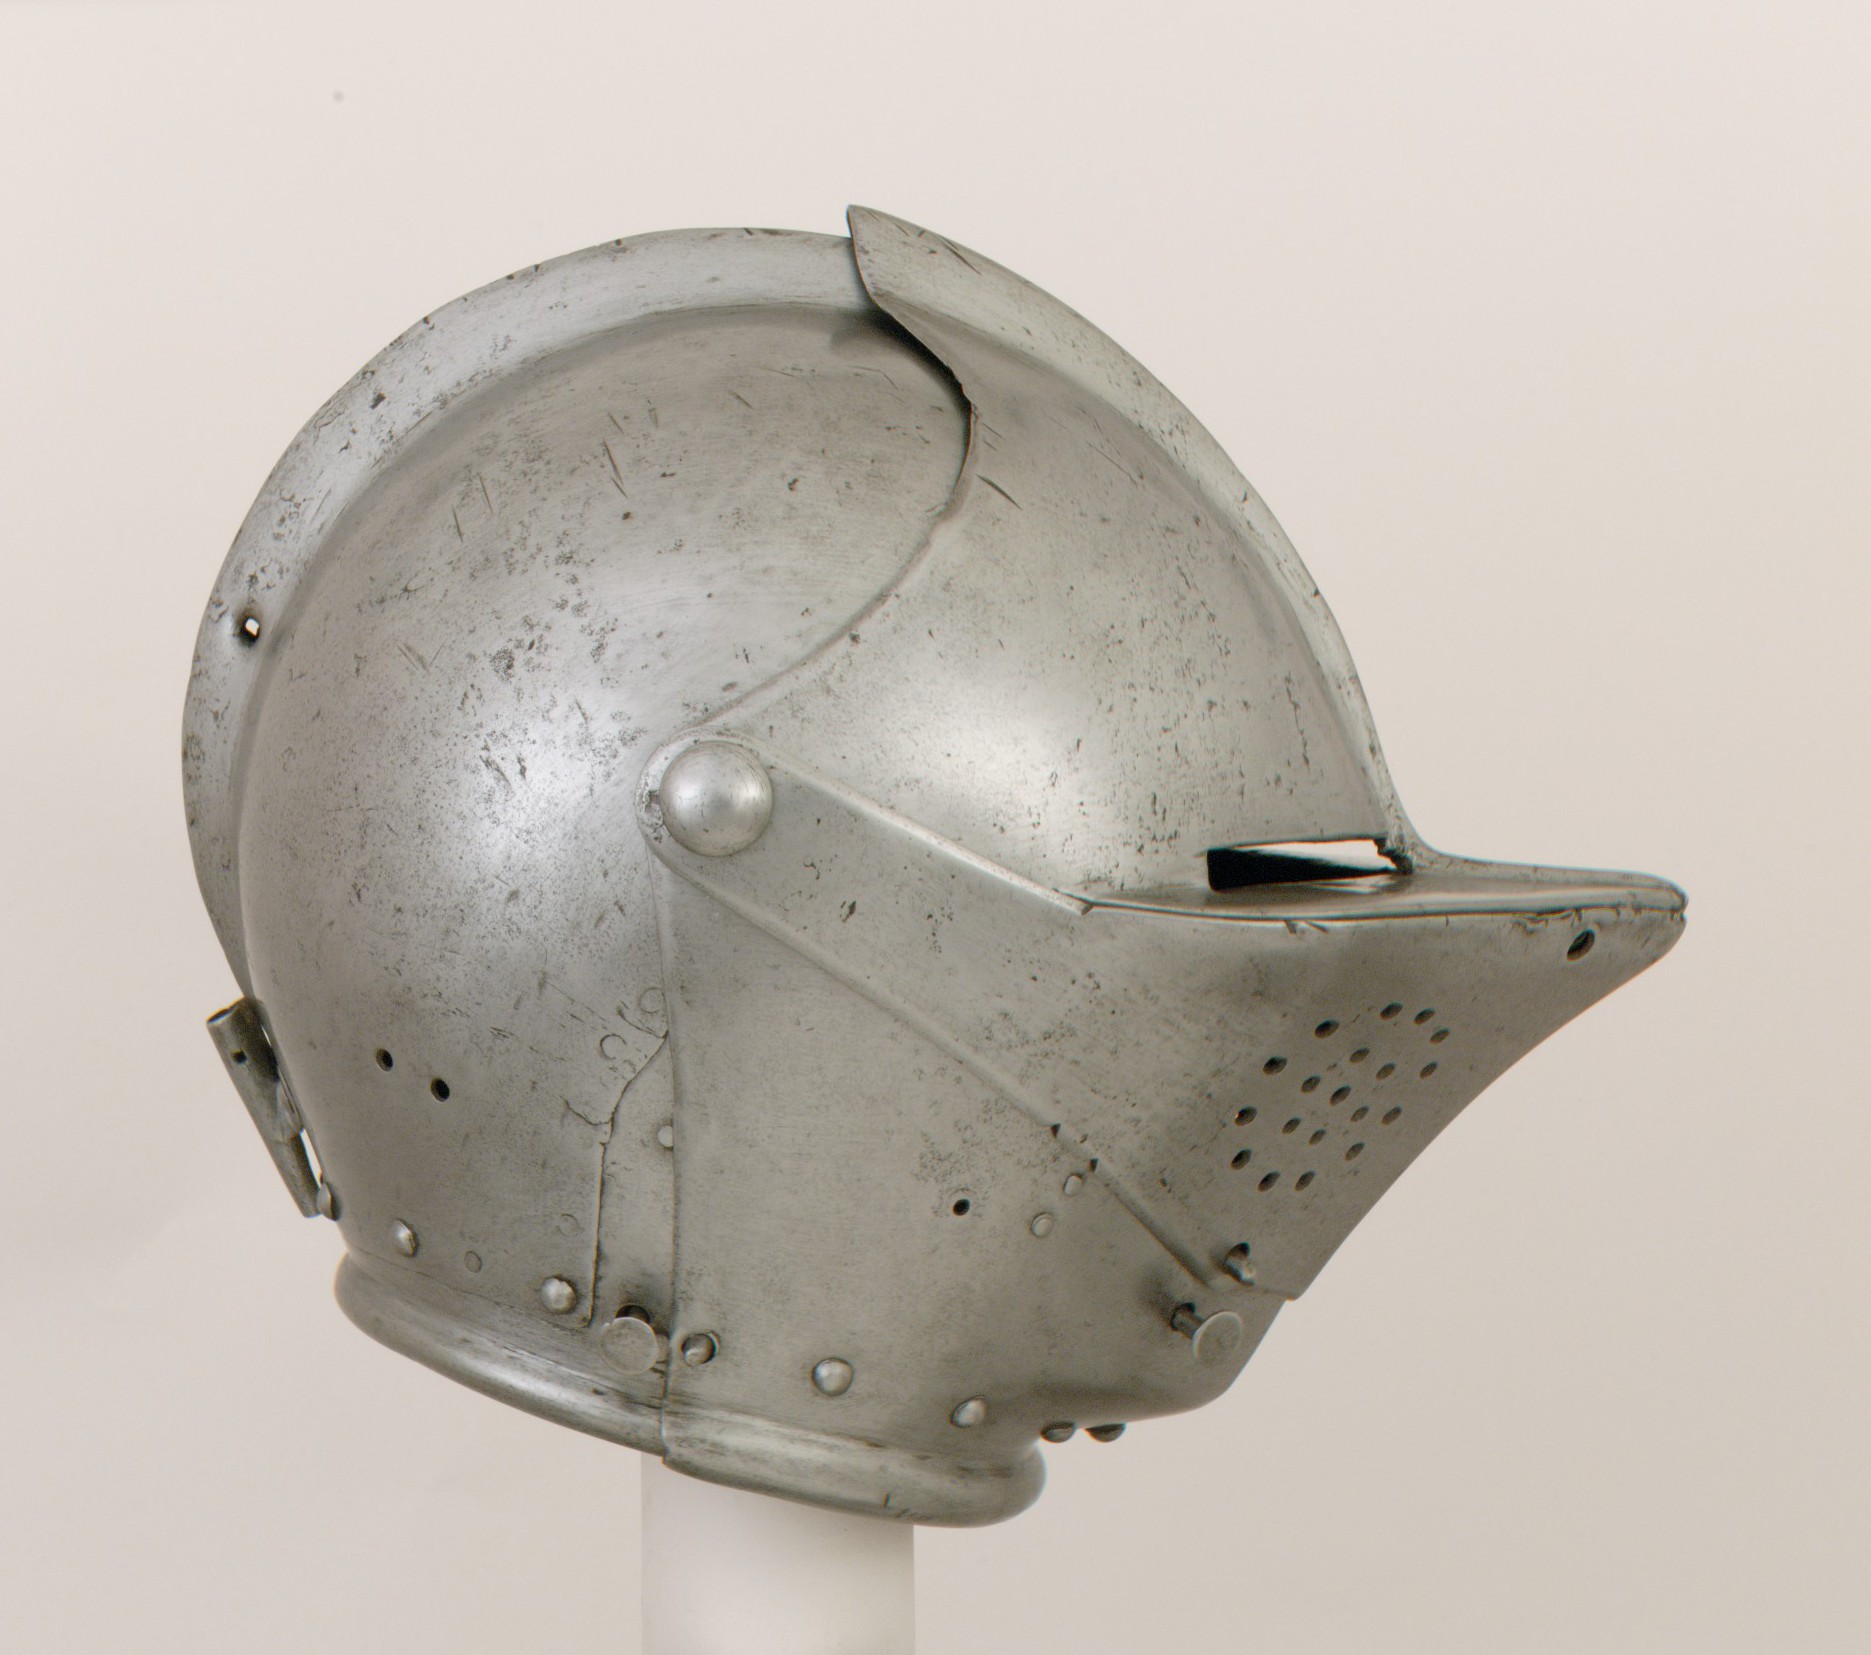 Possibly Art German, on Swedish, Foot or for Metropolitan Stockholm the Dresden; | of Close-Helmet Museum | Tournament The